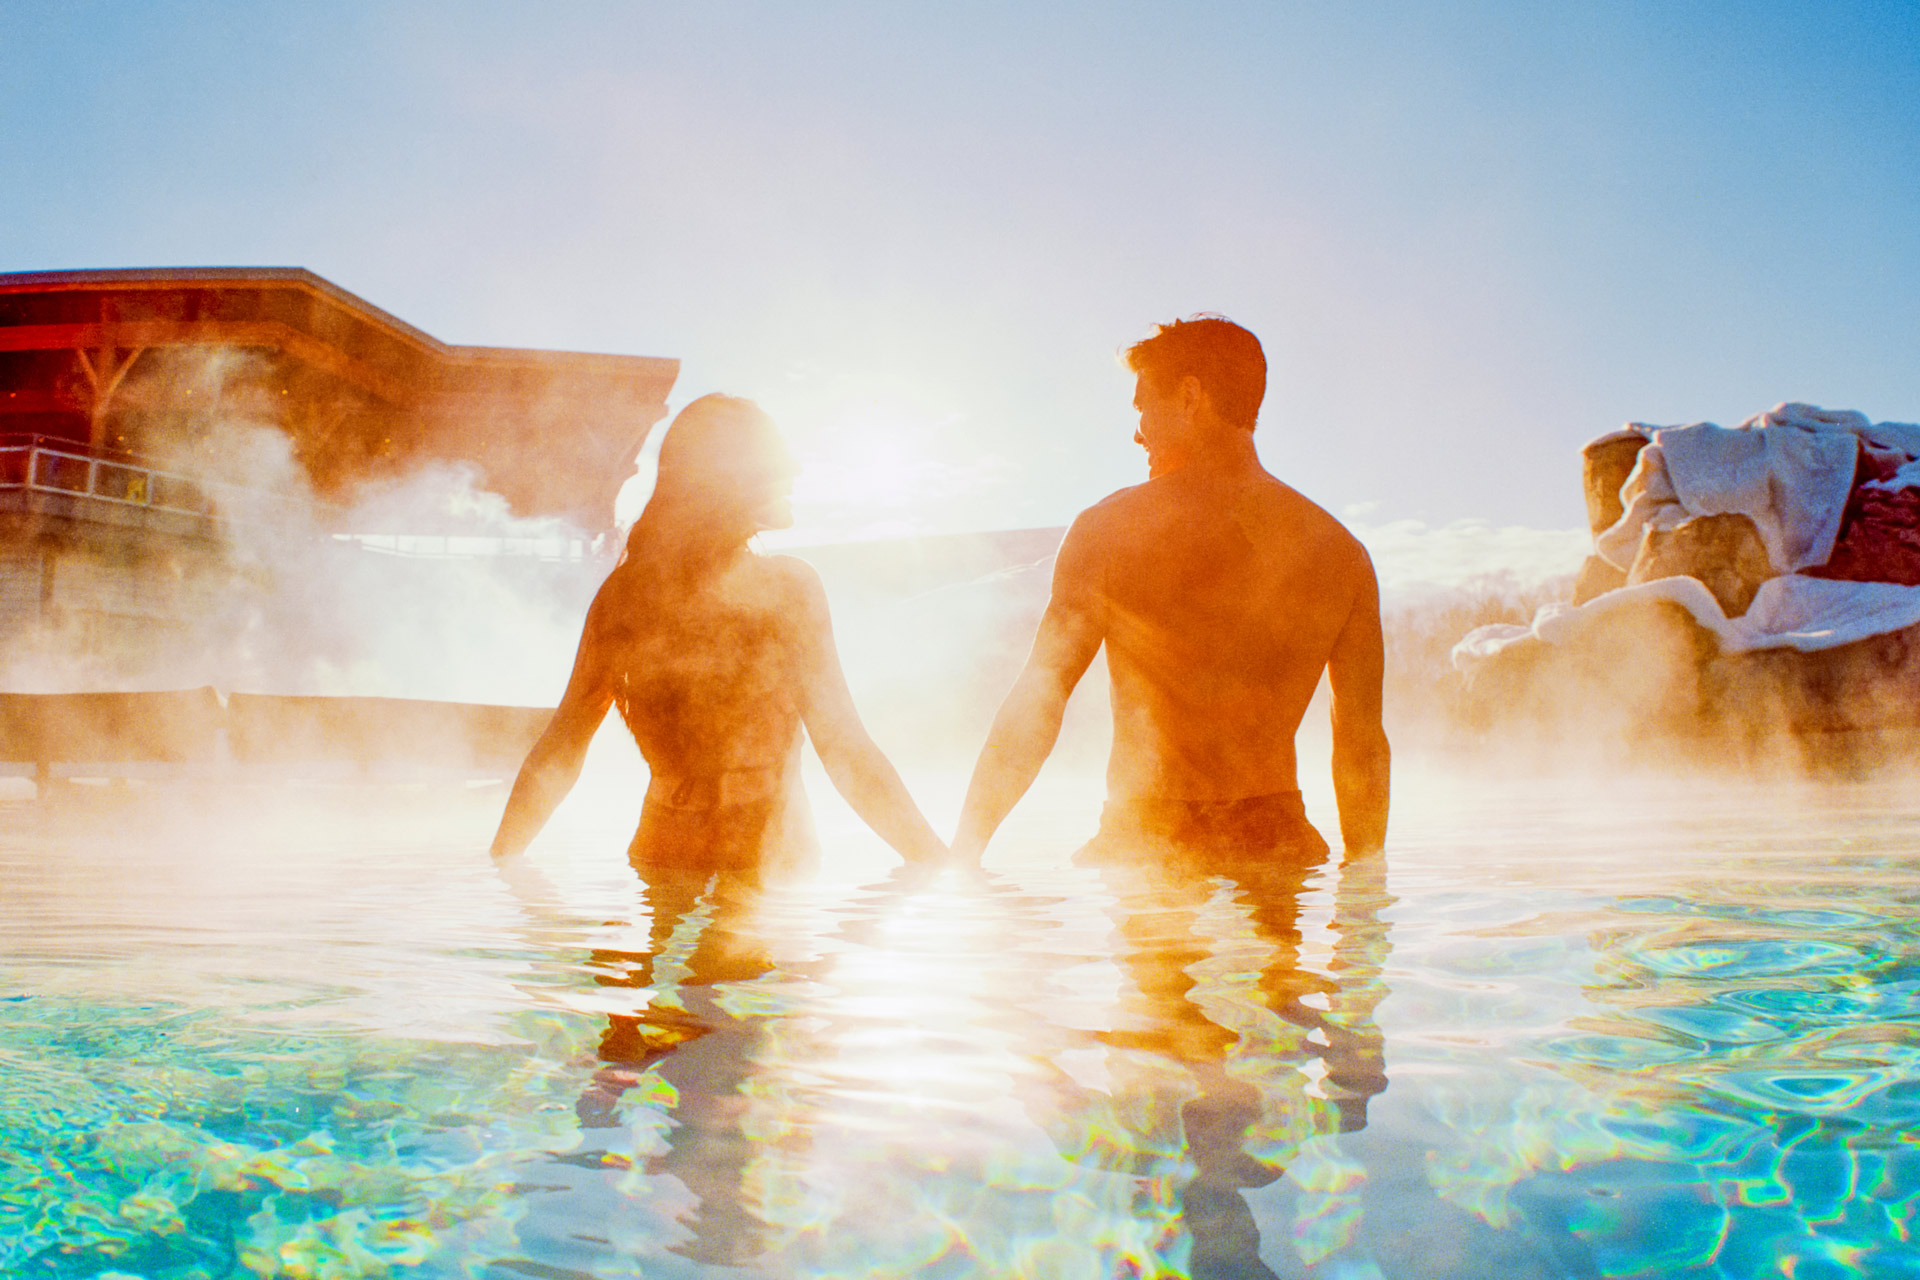 Click here to open the gallery overlay for the image: a man and woman holding hands in a steaming pool